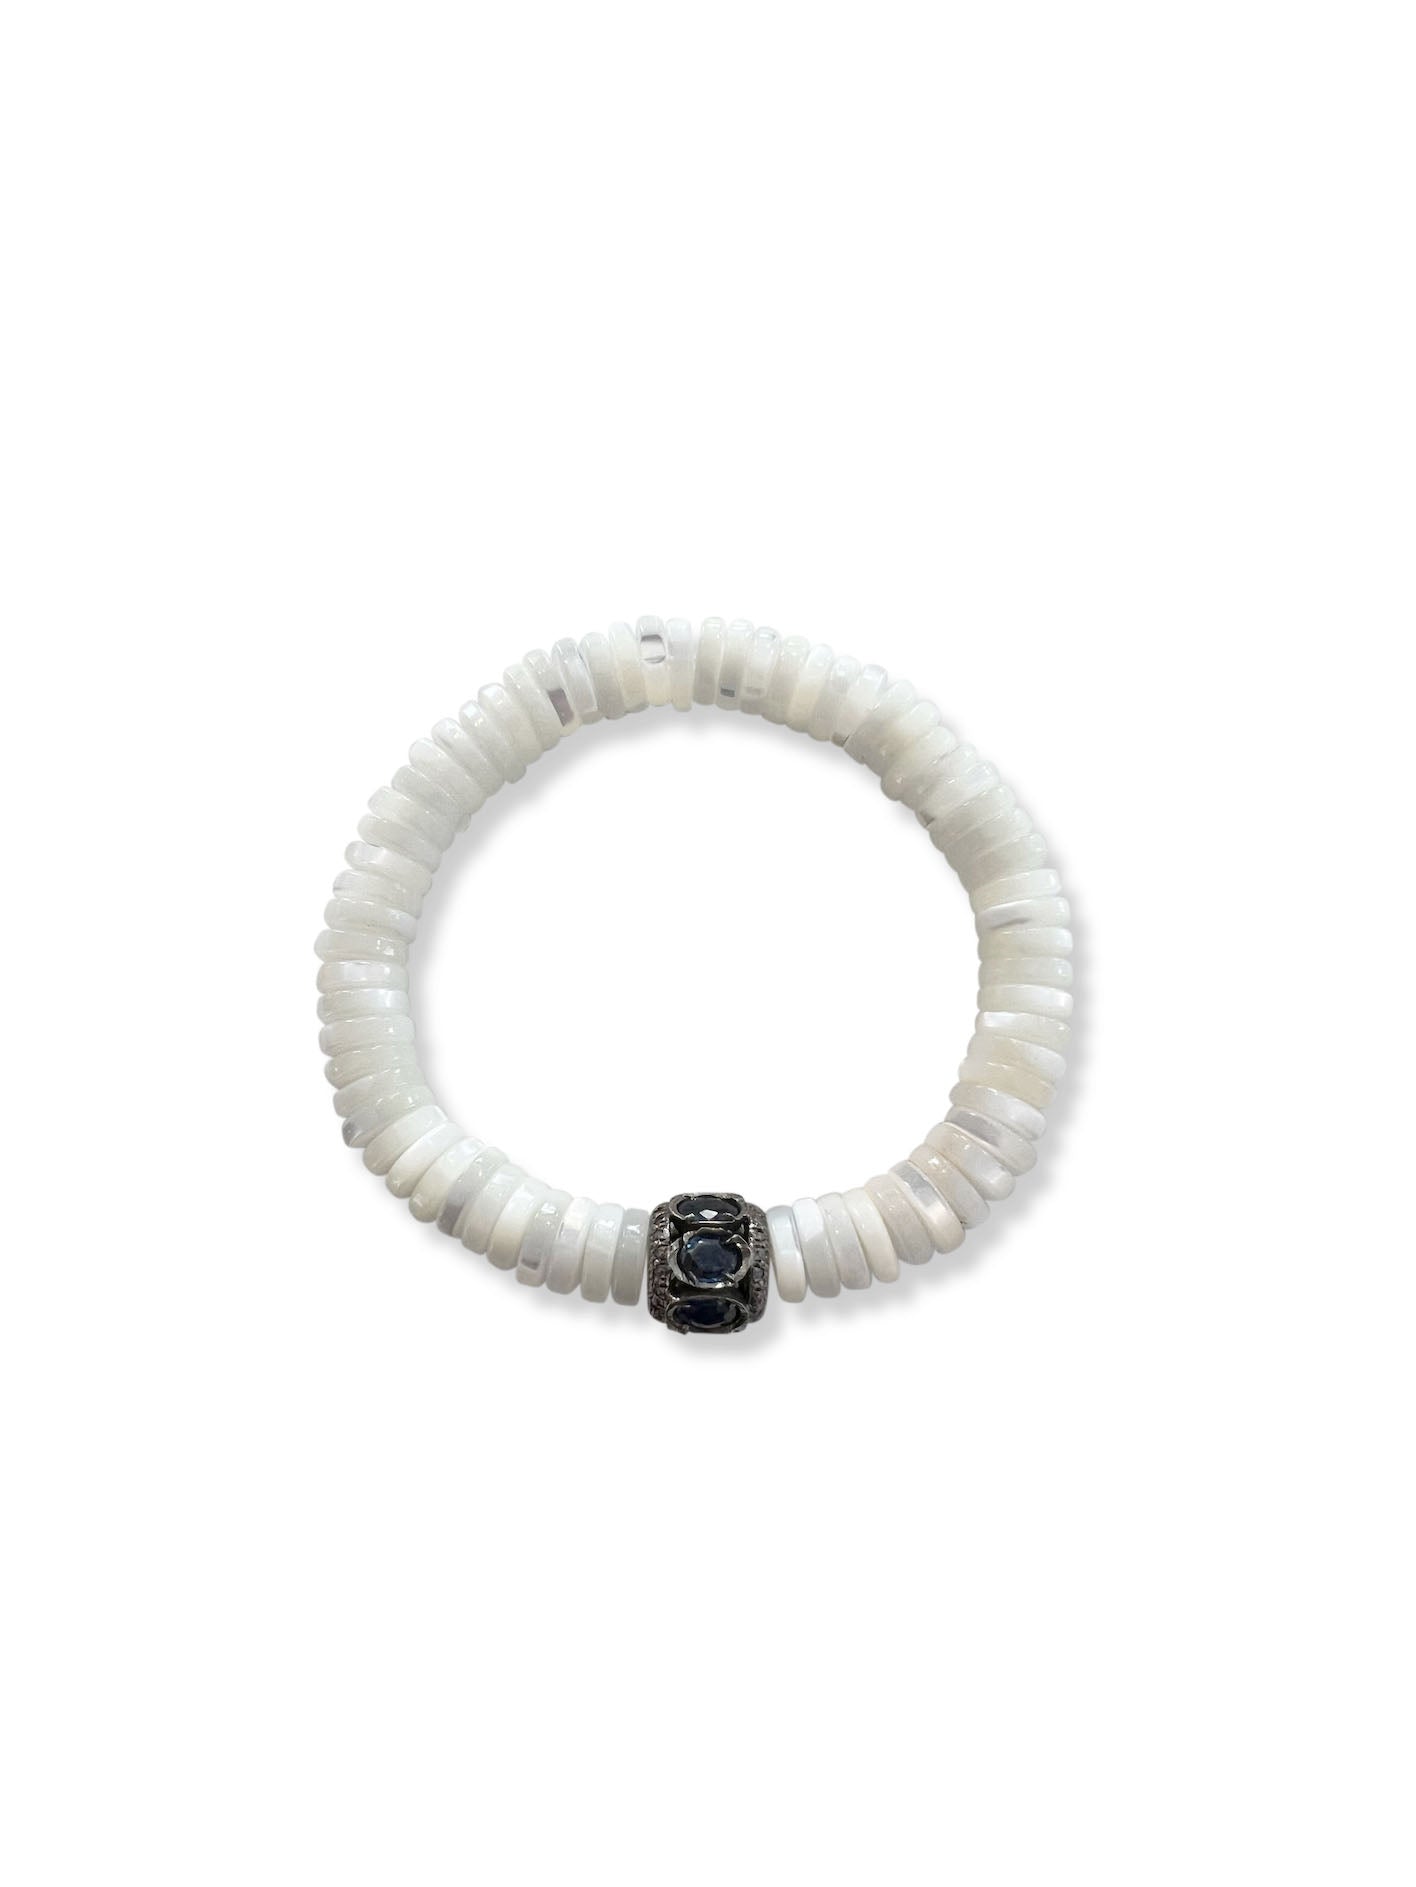 Mother of Pearl Heishi Beads with pave Diamond and Sapphire Bead